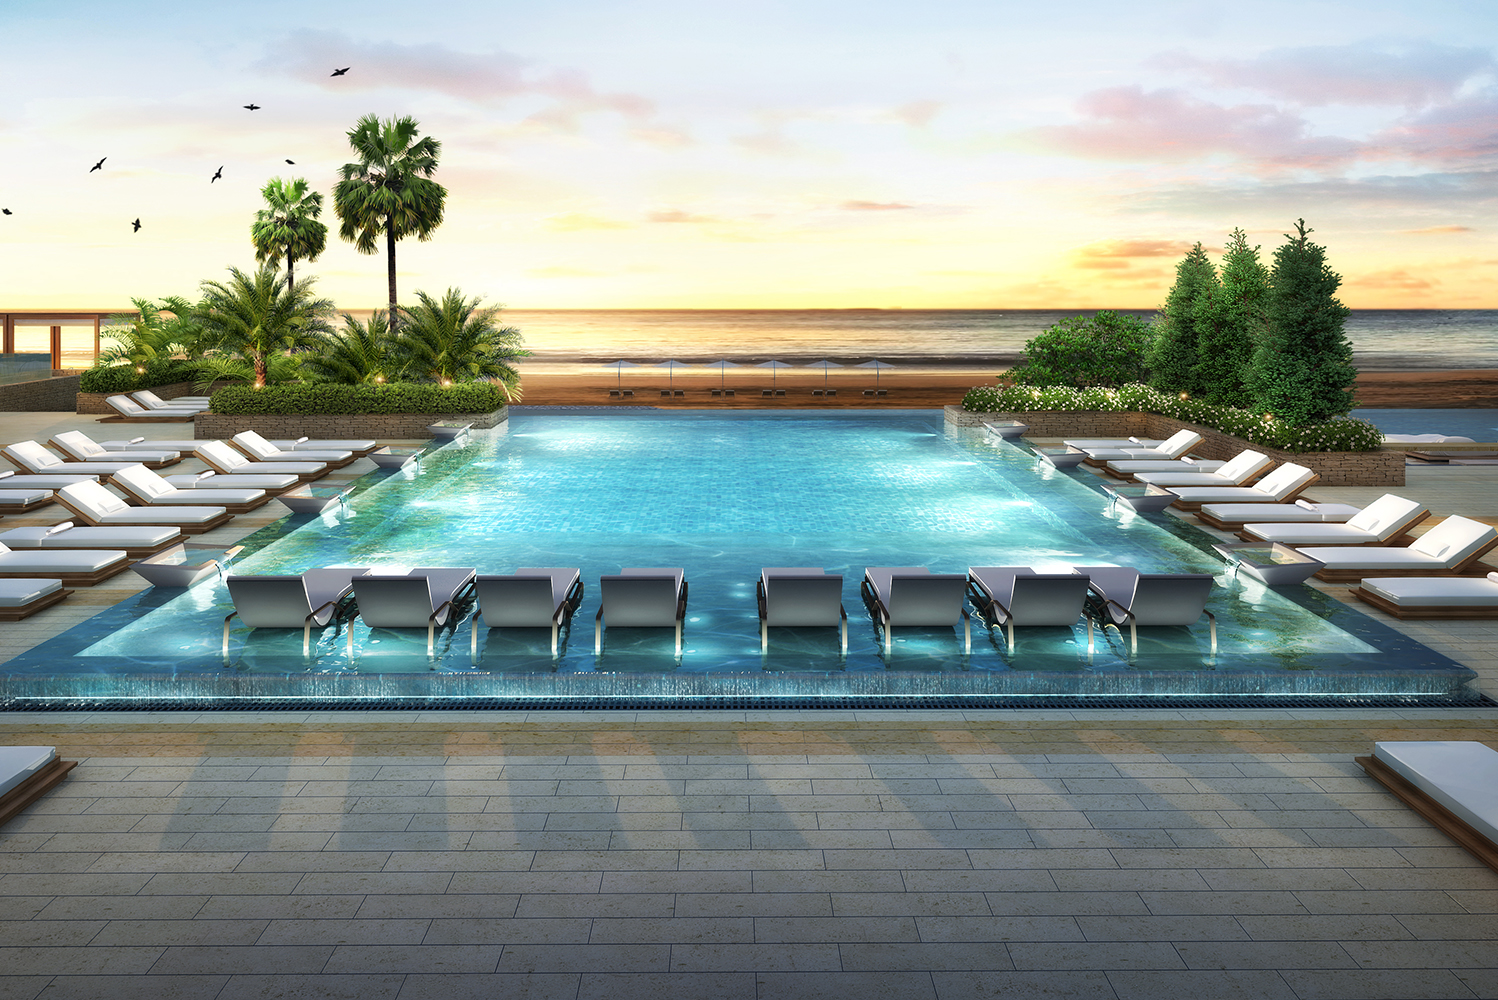 Cyprus newest luxury hotel Amara is set to launch in Spring 2019 